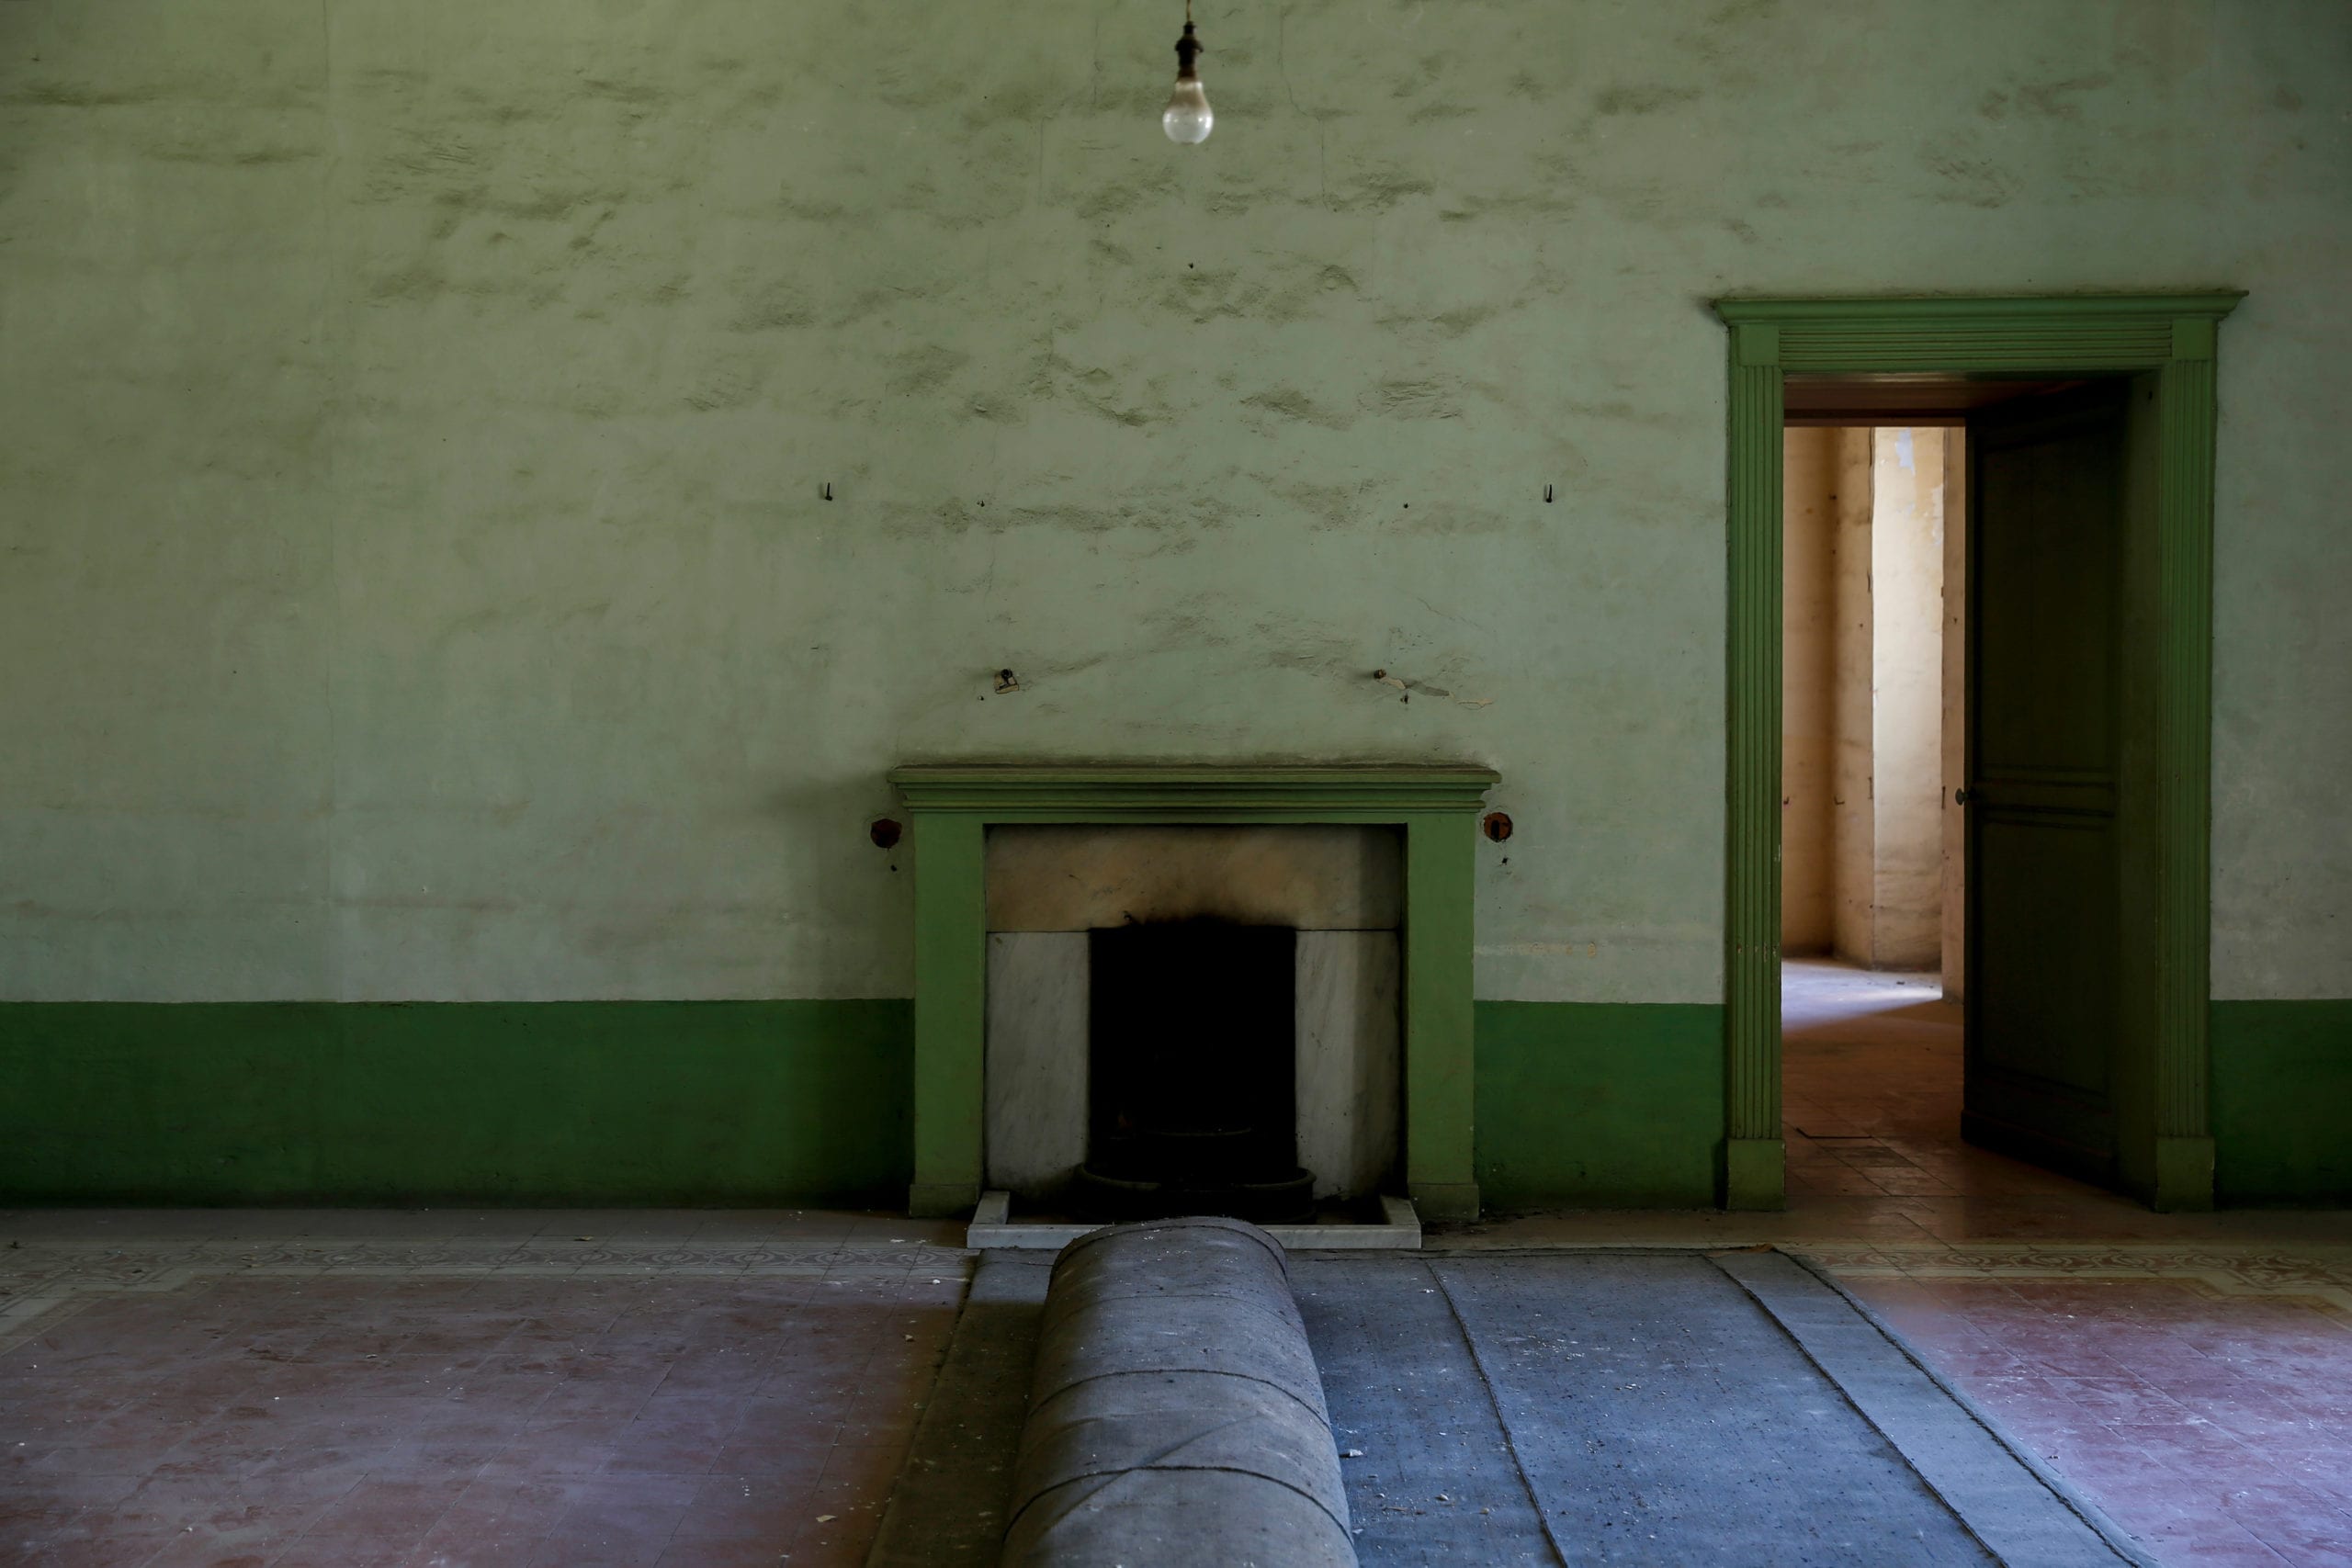 A rolled-up carpet is left in front of a fireplace, inside a room that was once used as the grand hall for receiving guests at Villa Guardamangia, a former residence of Britain's Queen Elizabeth and Prince Philip, in Pieta, Malta, June 23, 2020. The then-Princess Elizabeth and Prince Philip were in the first years of their marriage at the time and moved to Malta when Prince Philip was based there in command of a Royal Navy frigate. The Maltese government agency Heritage Malta acquired the Villa Guardamangia for some five million euros and hopes not just to restore the villa to the way it looked several decades ago, but also to turn it into a museum of Malta's history as a British colony until independence in 1964, and the links with the British royal family. REUTERS/Darrin Zammit Lupi     SEARCH "QUEEN ELIZABETH VILLA" FOR THIS STORY. SEARCH "WIDER IMAGE" FOR ALL STORIES